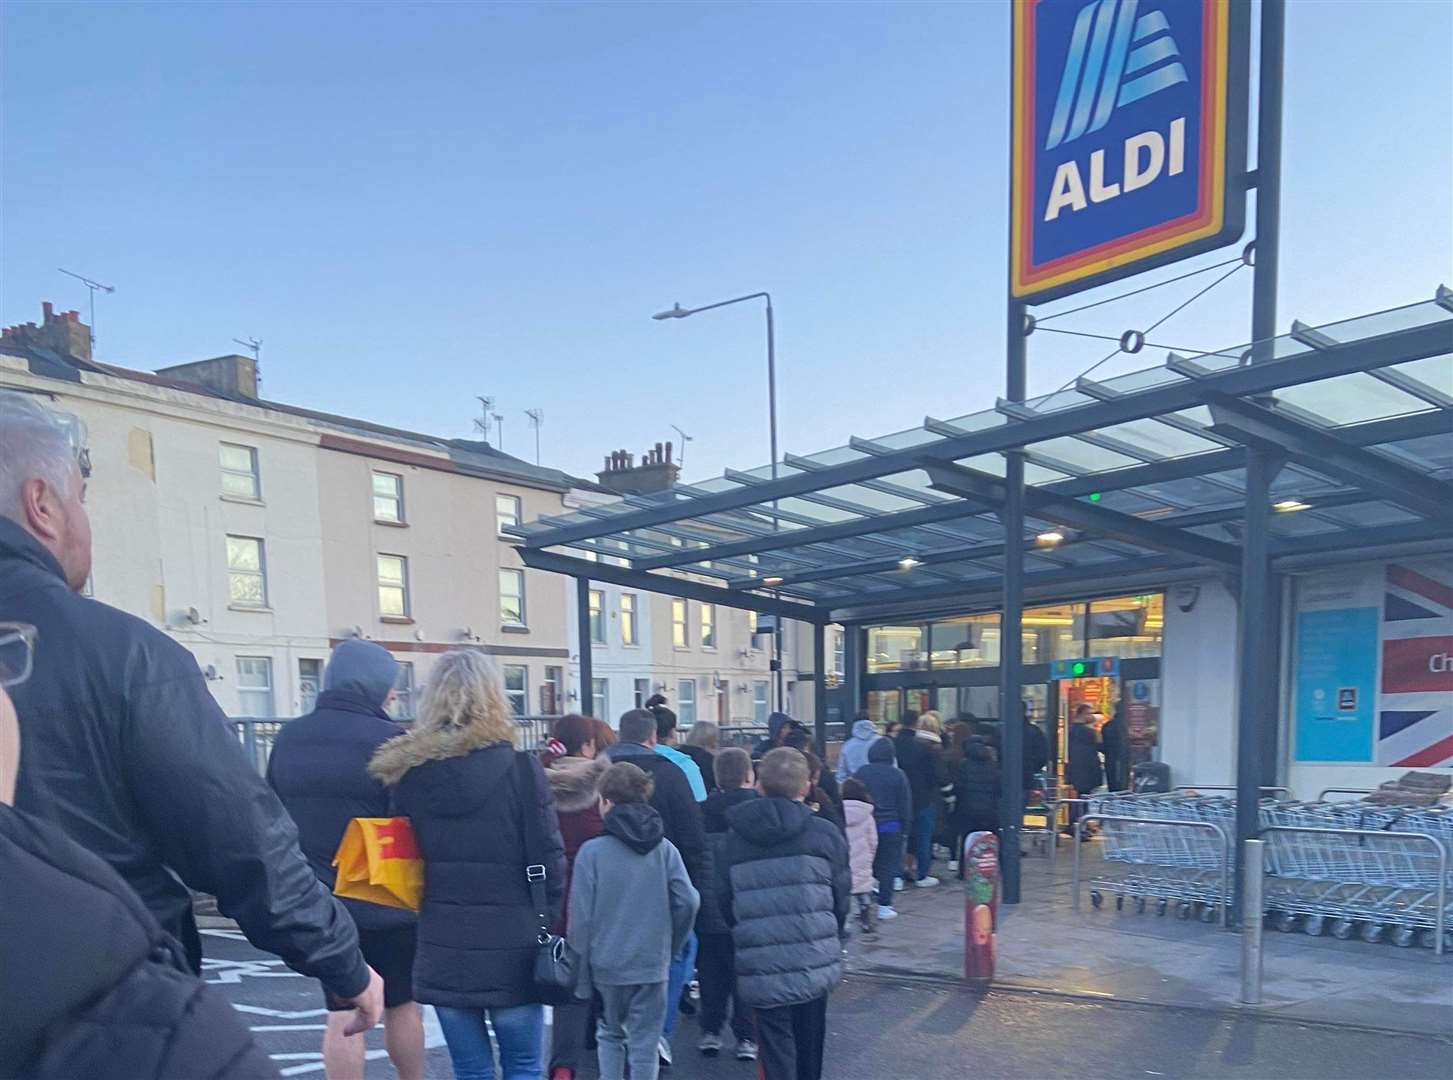 The queues for the Prime drink in Aldi Gravesend. Picture: Ellie-Louise Dadswell